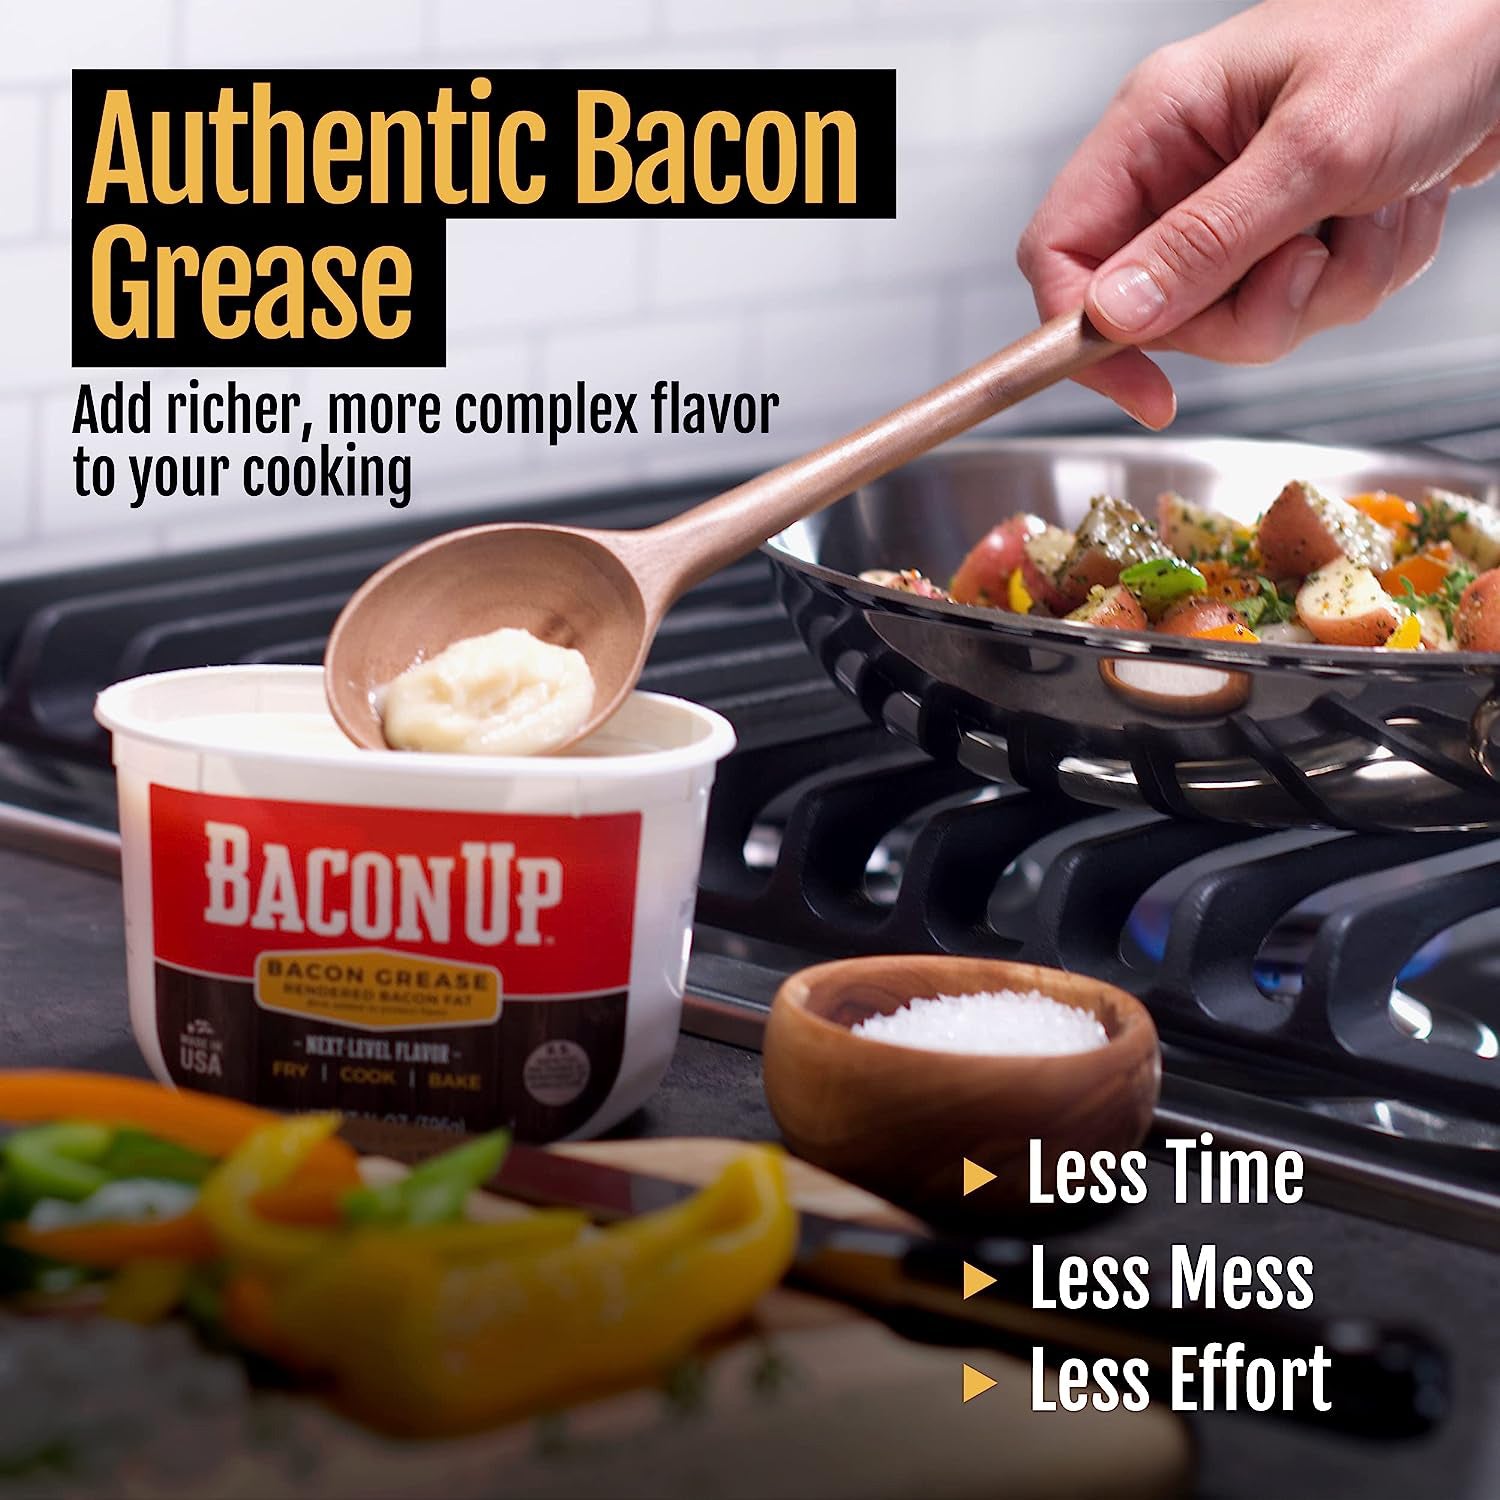 Rural King Supply - Bacon Up Bacon Grease next level flavor for you to fry,  cook or bake with. Now only $6.99